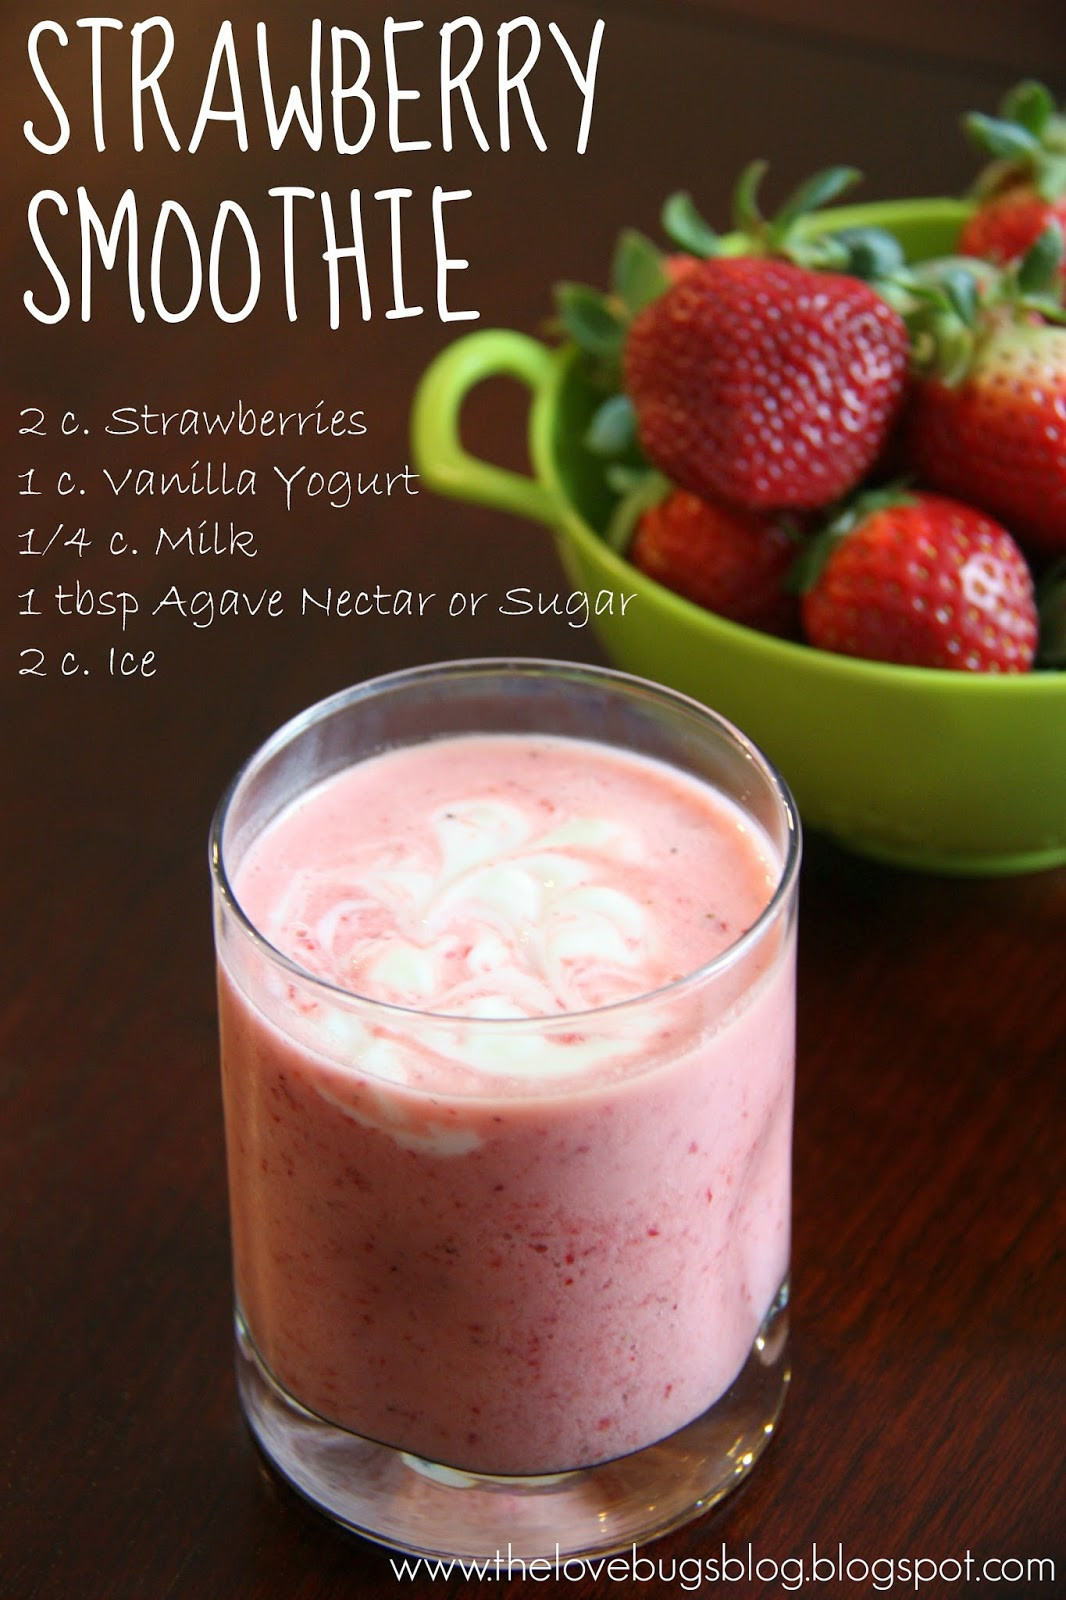 Strawberry Smoothie Recipes Healthy
 Drinks Archives The Lovebugs Blog